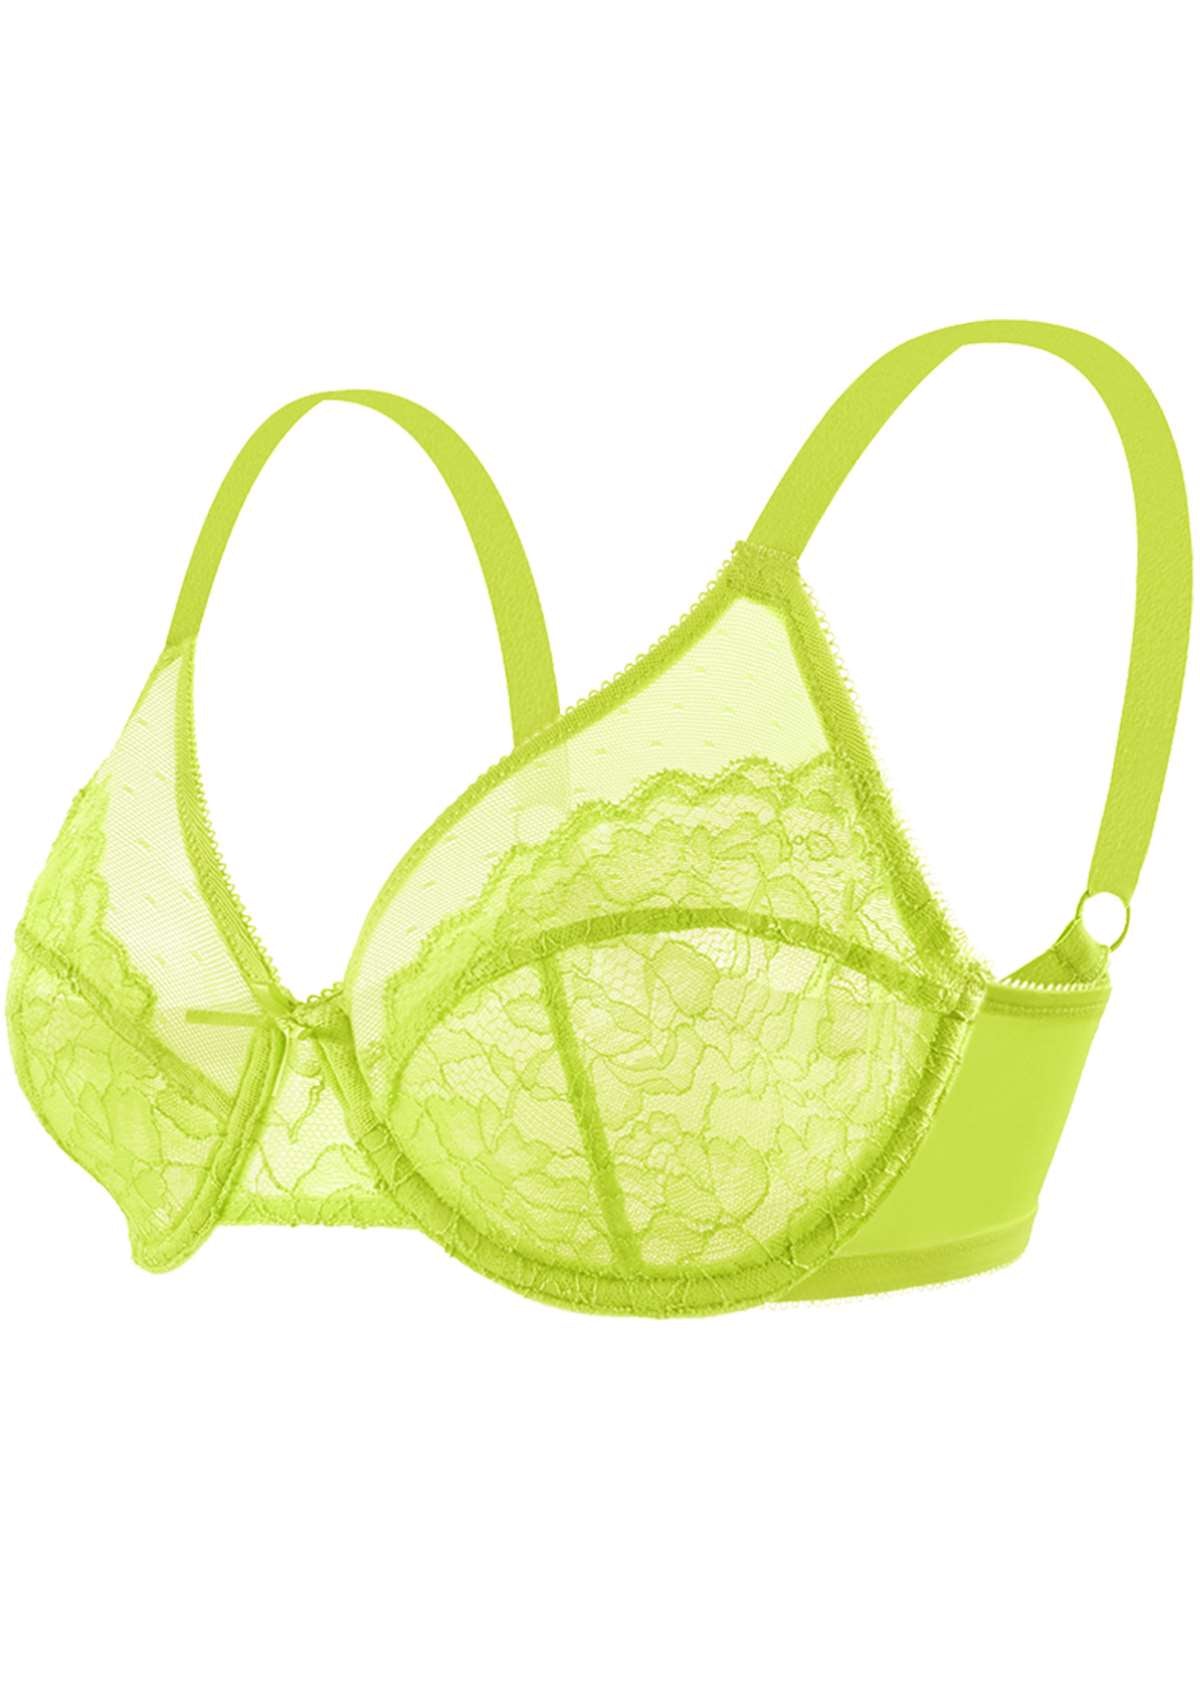 HSIA Enchante Full Cup Minimizing Bra: Supportive Unlined Lace Bra - Lime Green / 38 / C